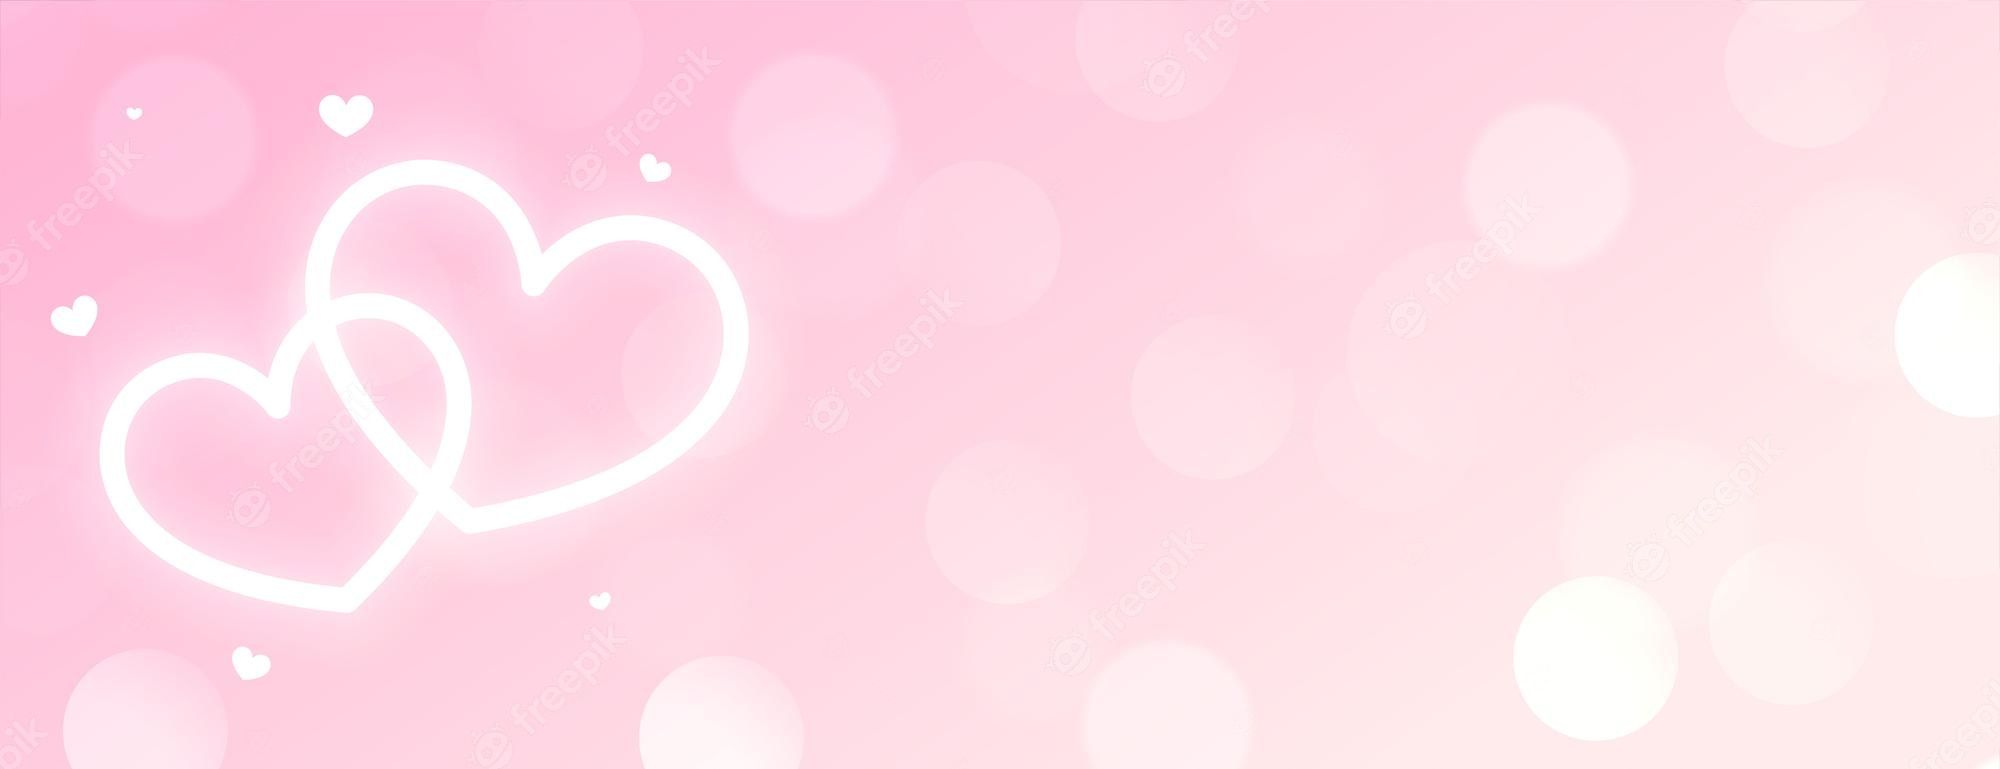 A banner with hearts on a pink background - Pink heart